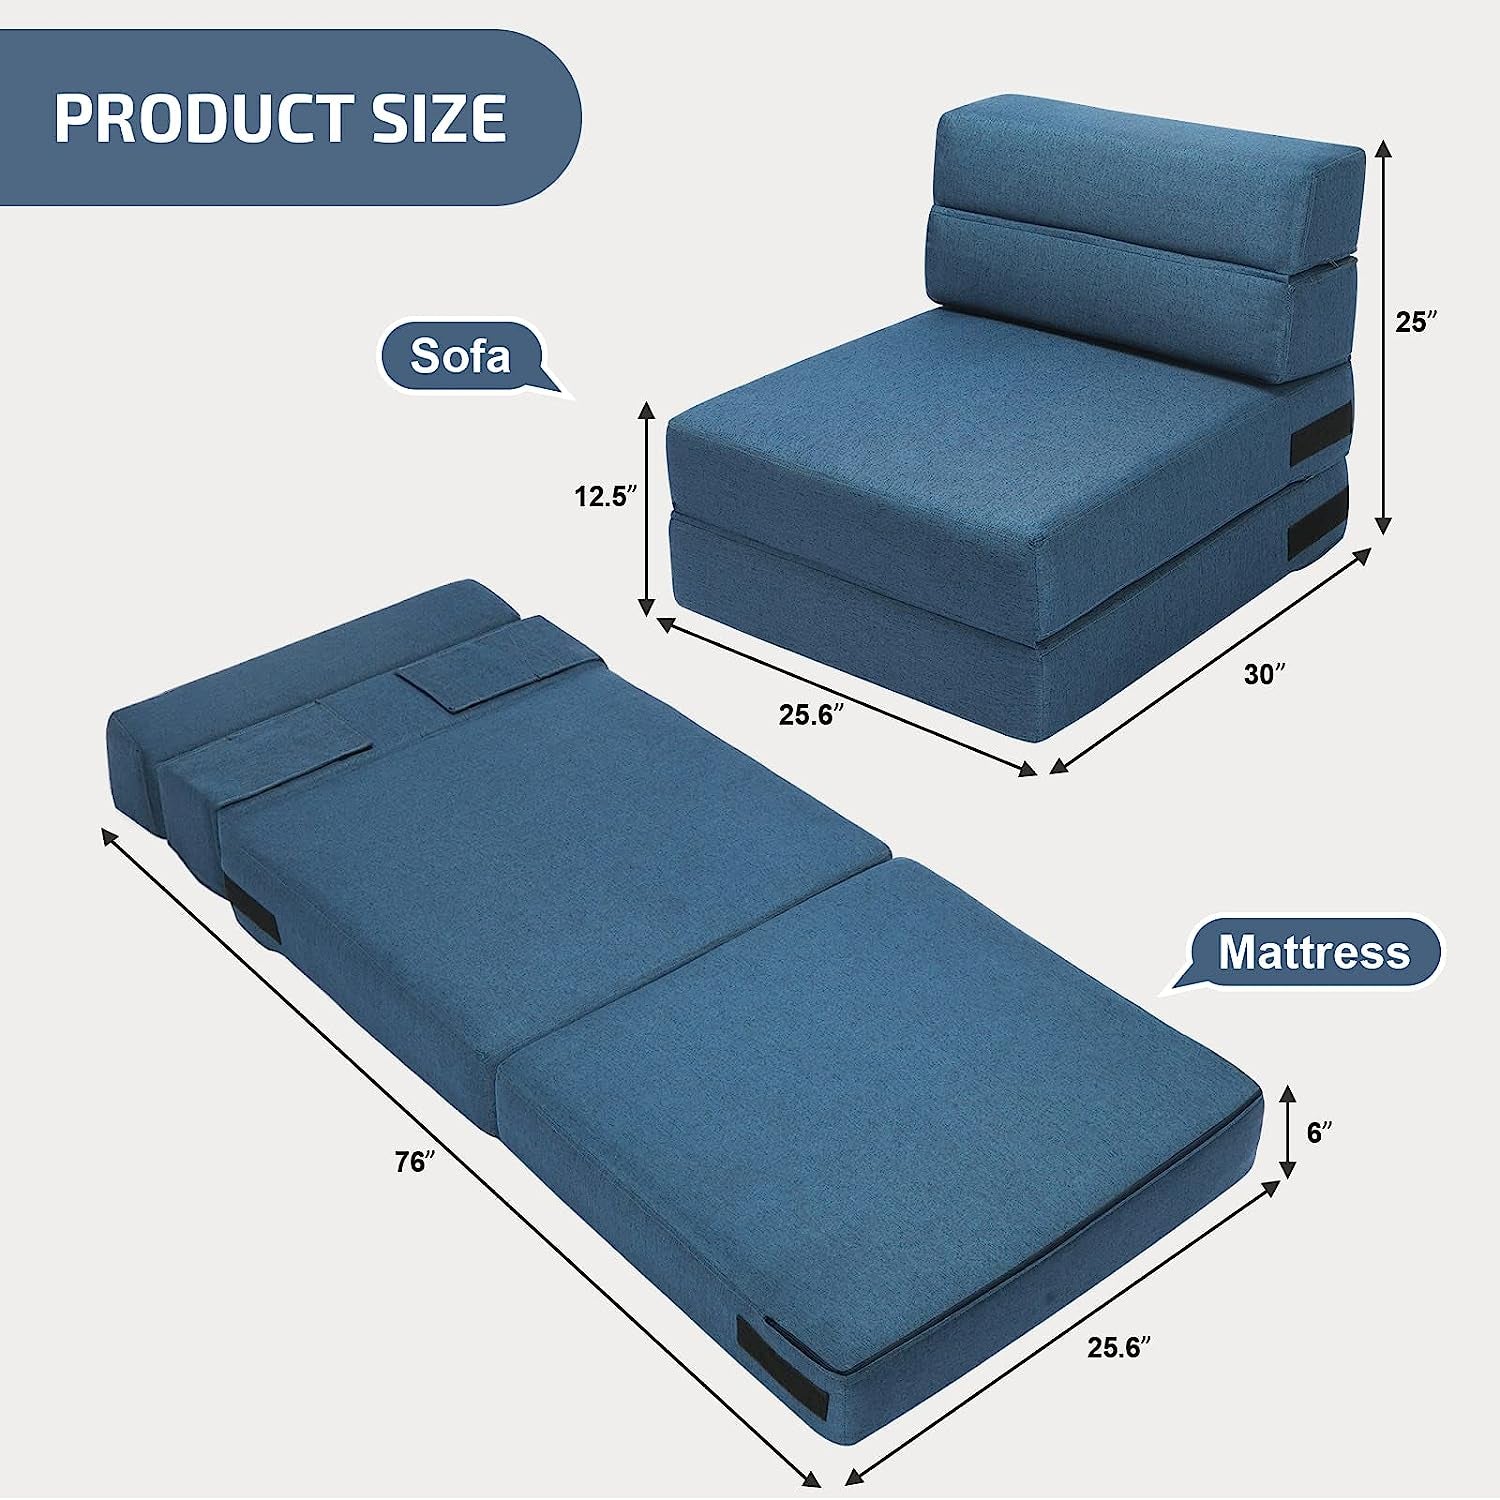 Convertible Folding Sofa Bed, Floor Couch & Sleeping Mattress, Suitable for Kids, Foldable Memory Foam Sleeper for Home t - Navy Blue